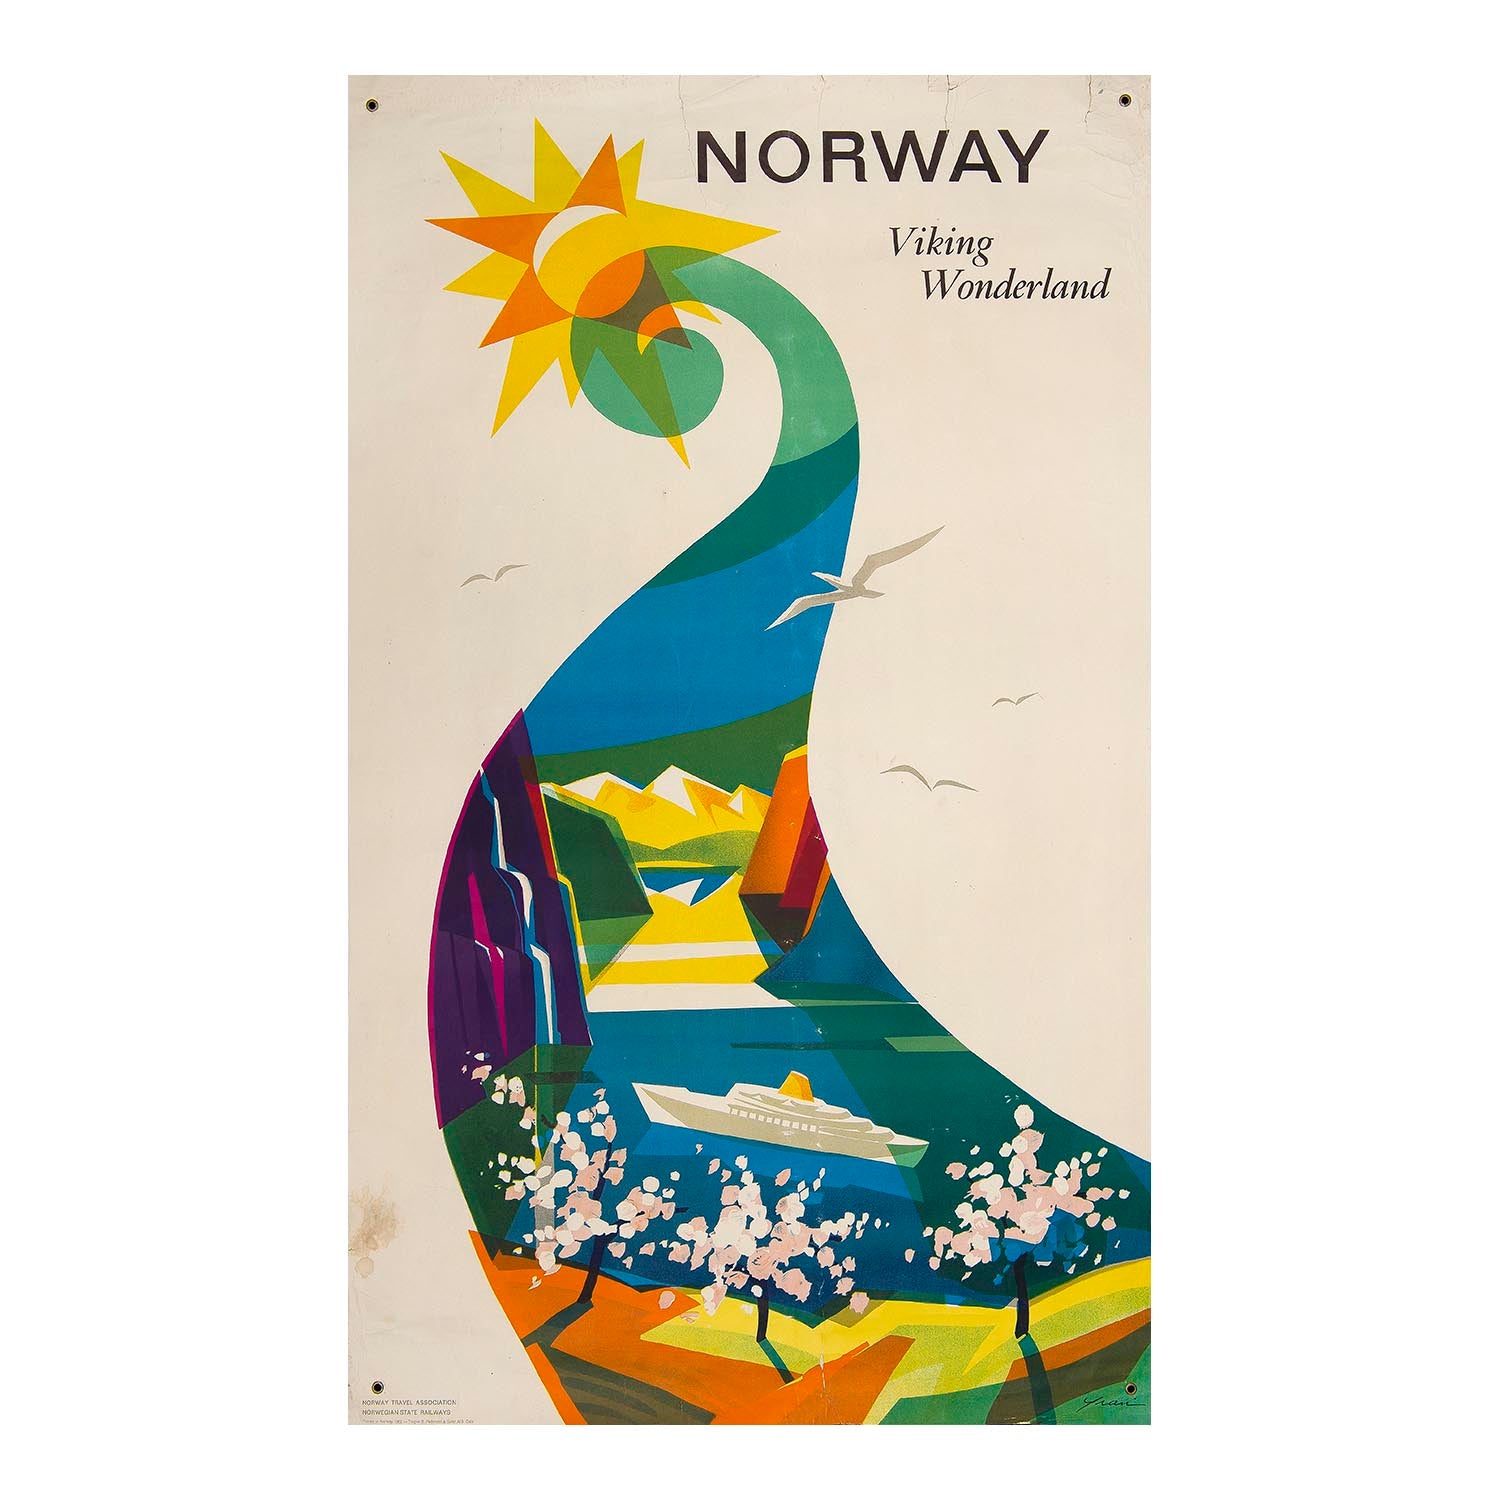 An original Norwegian travel poster, Norway, Viking Wonderland, designed by Knut Yran for the Norway Travel Association and Norwegian State Railways, 1962. The colourful ‘mid-century modern’ design features a pleasure cruiser traversing a Norwegian fjord, viewed through a graphic representation of a Viking long boat.